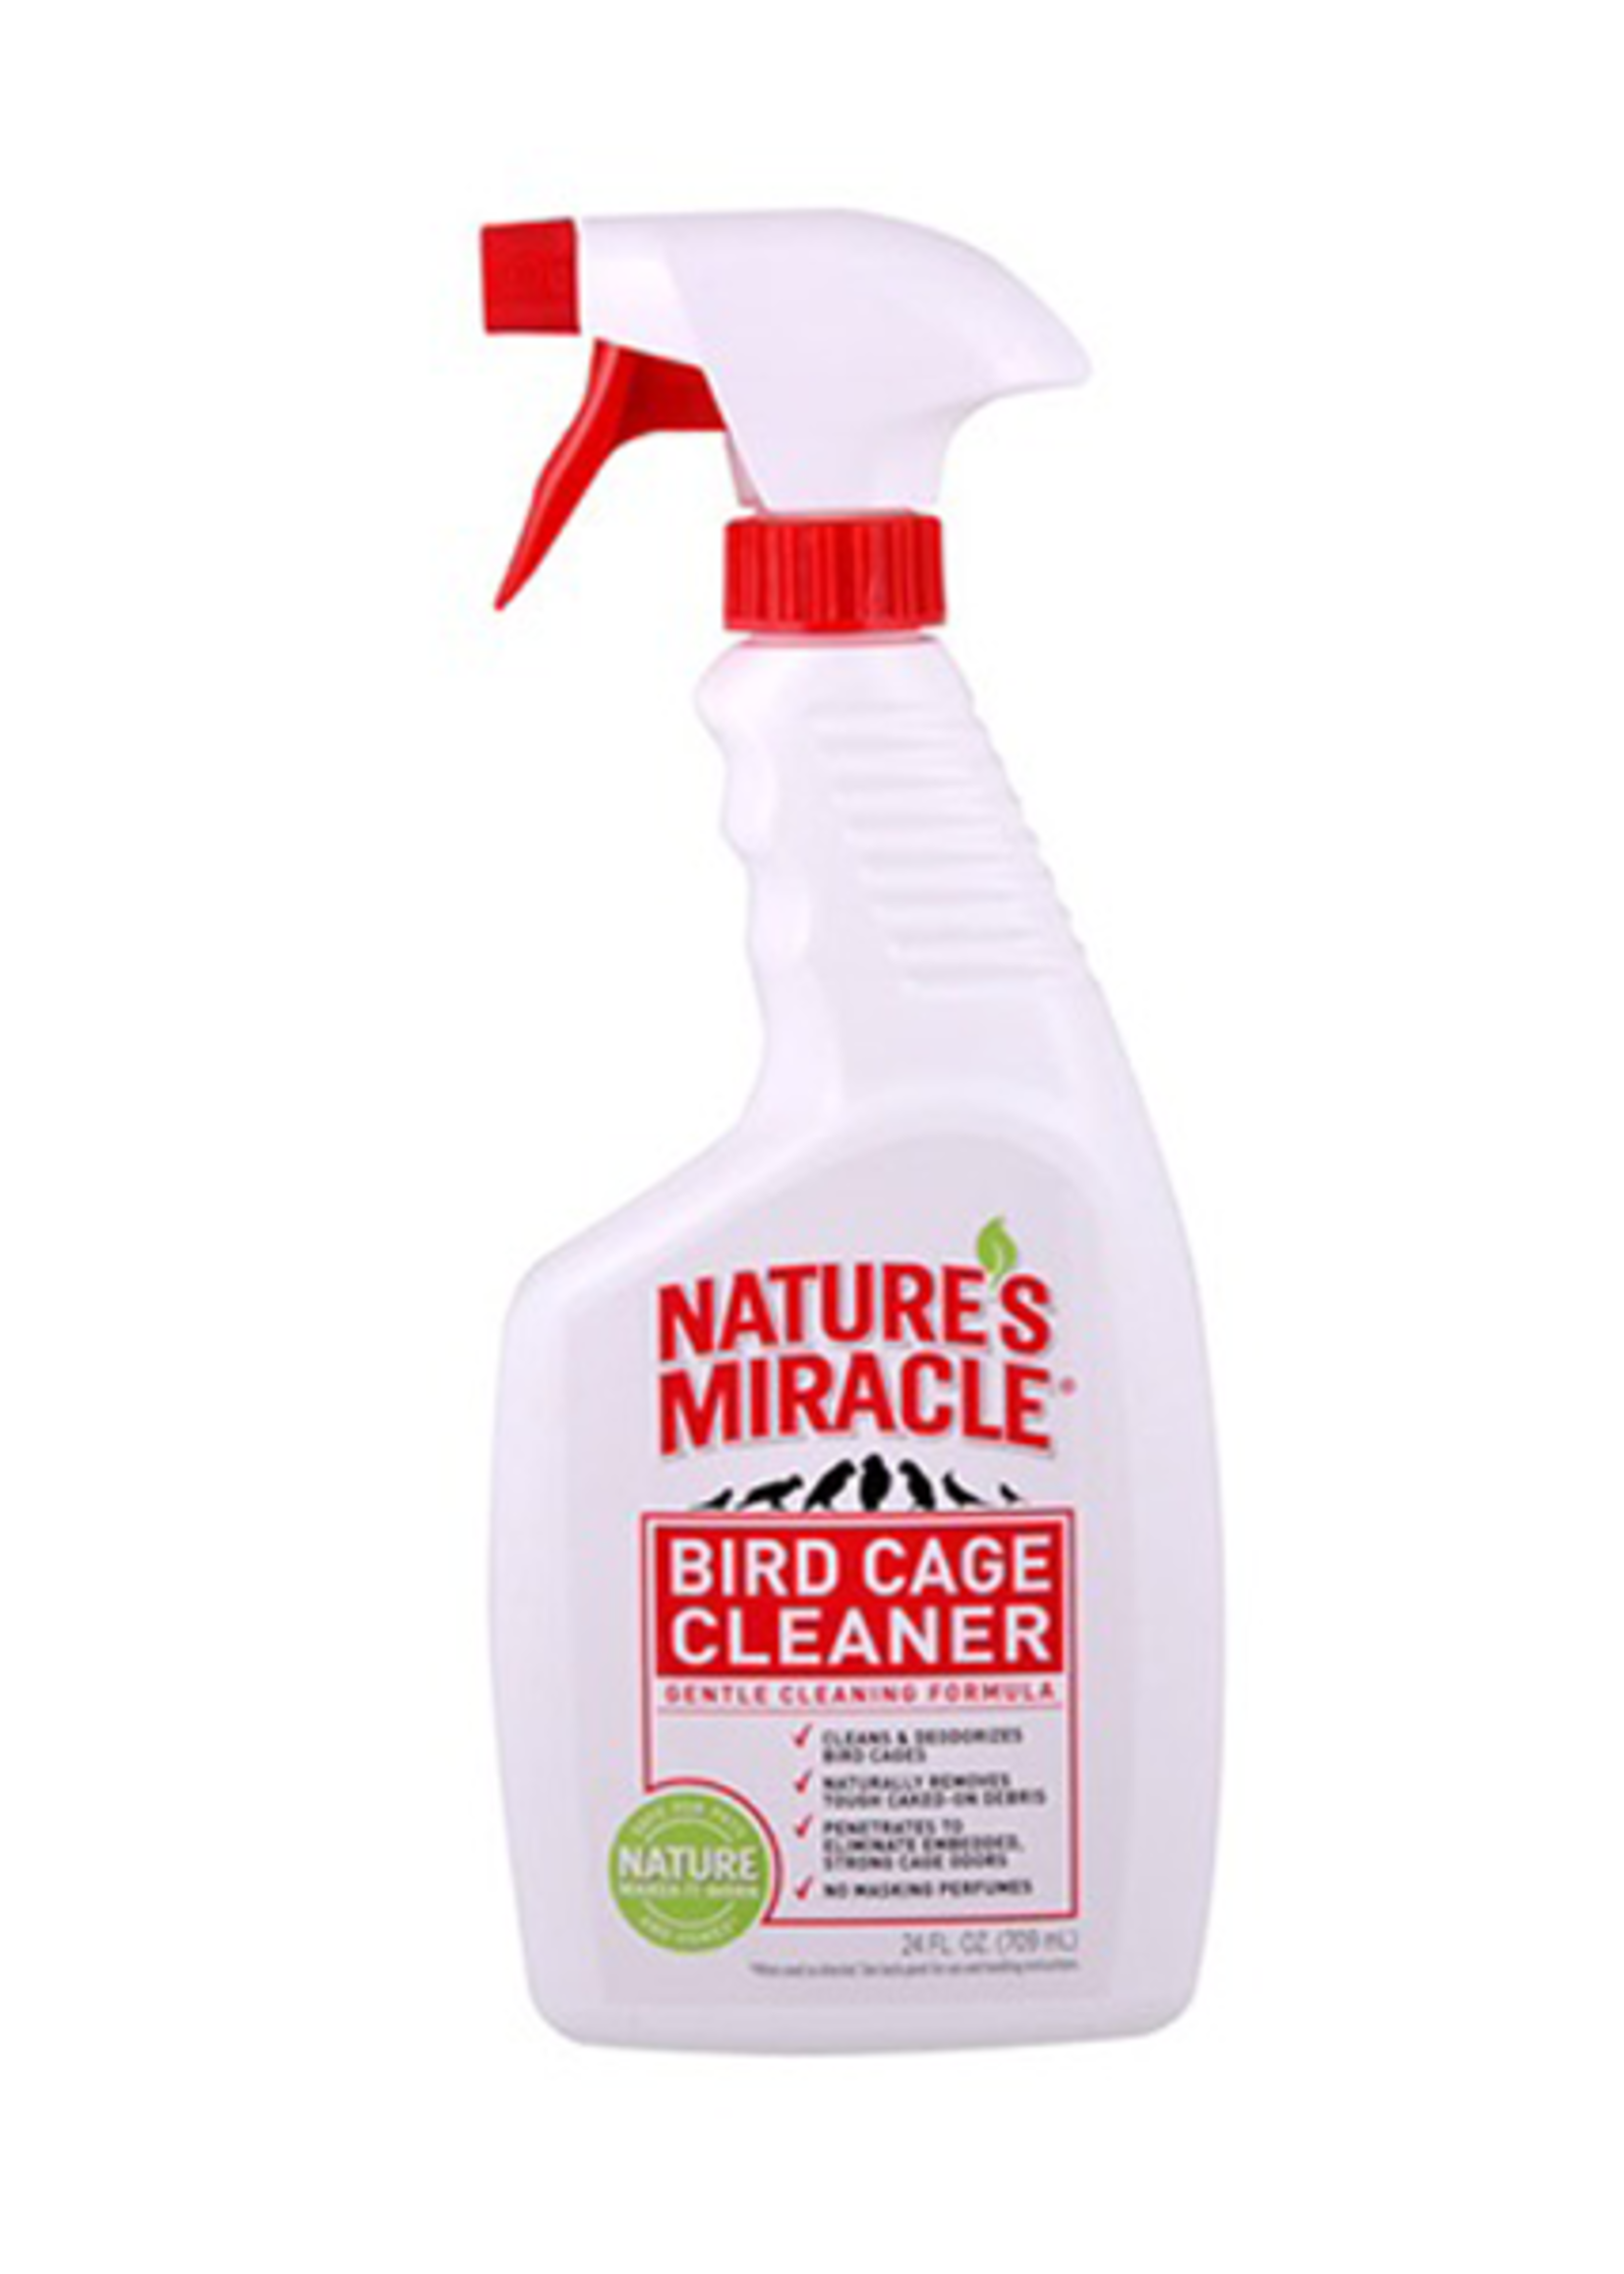 Nature's Miracle NM Bird Cage Cleaner Spray 24 oz ***Sp Ord***